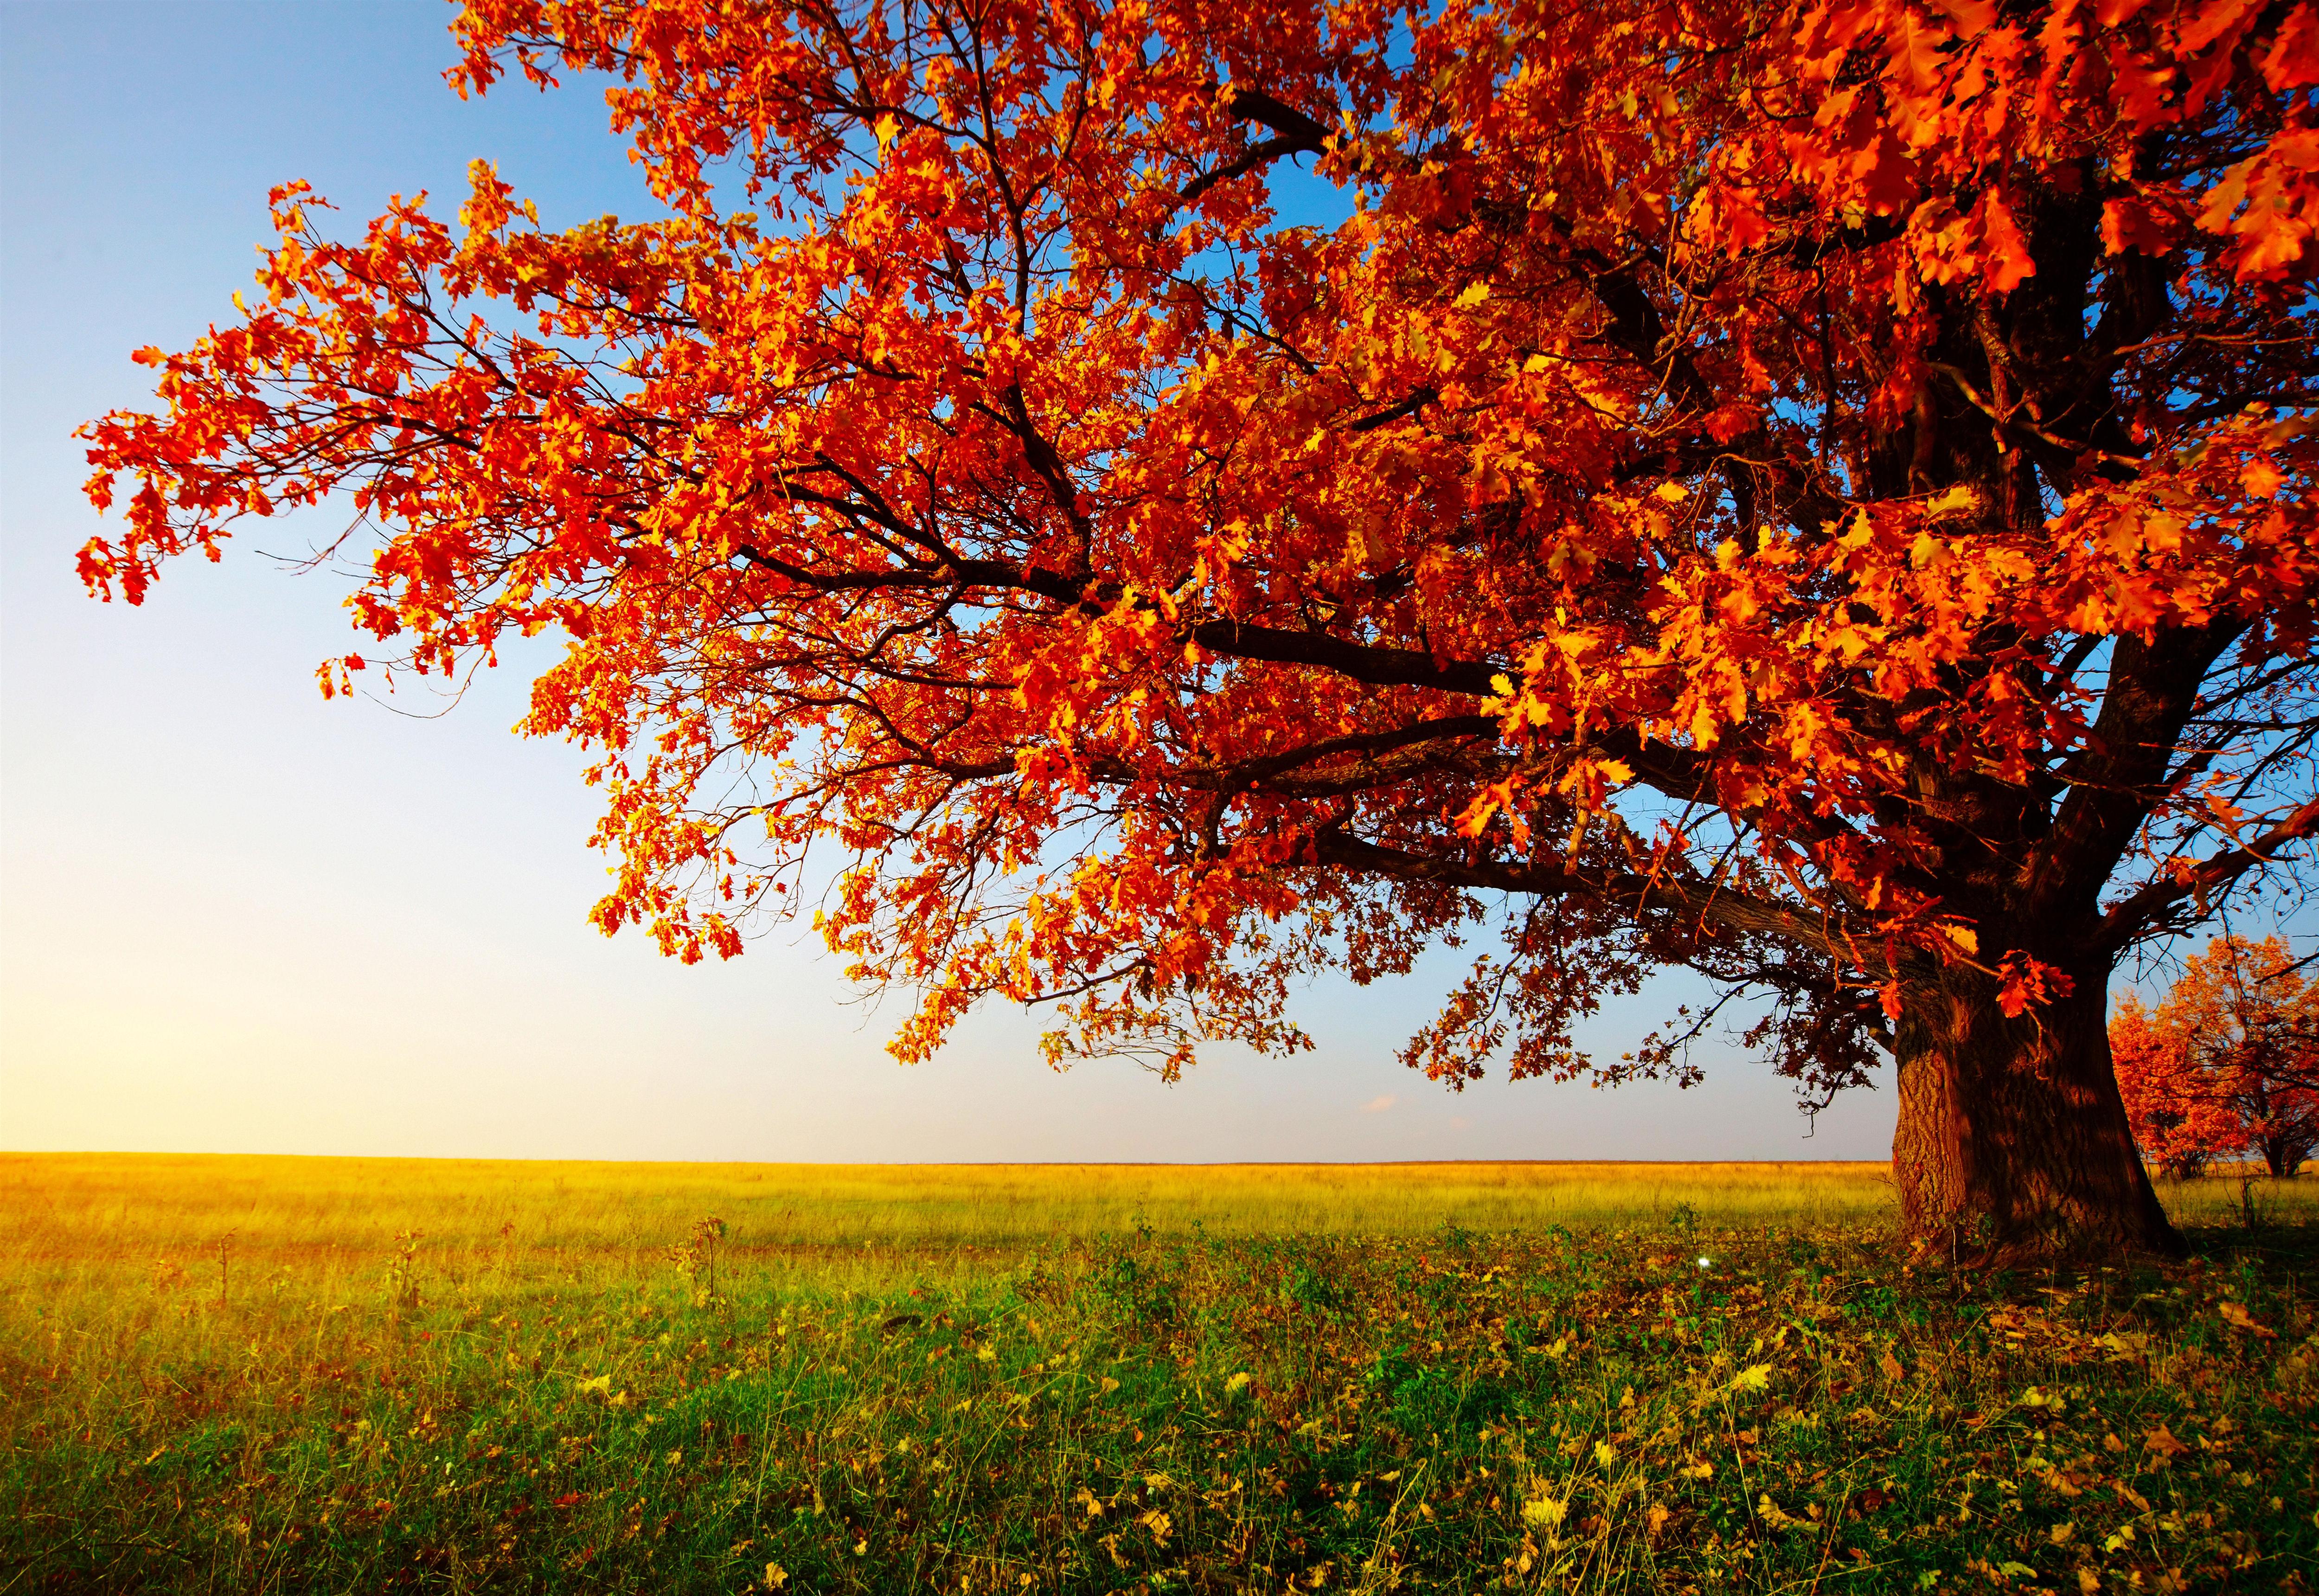 Fall background images for computer